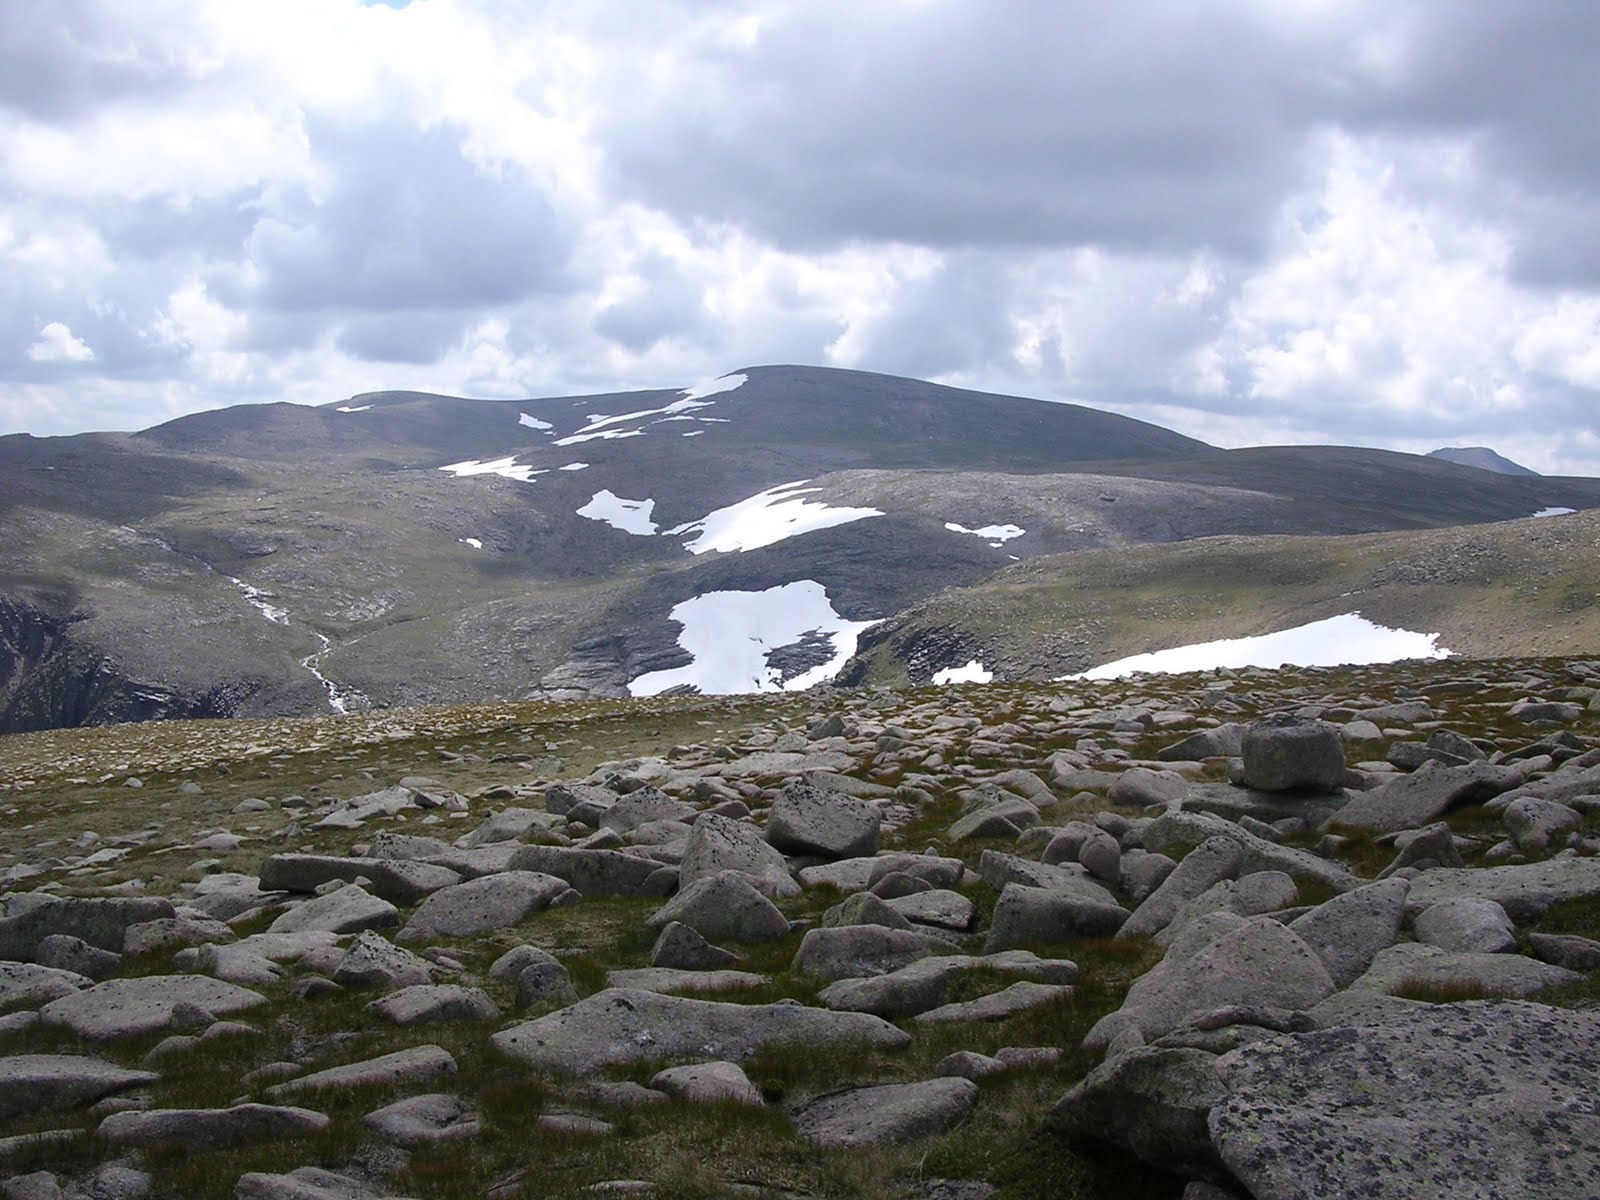 [Britains+second+highest+mountain+Ben+Macdui,+situated+in+the+Cairngorms+National+Park+in+the+Scottish+Highlands.JPG]